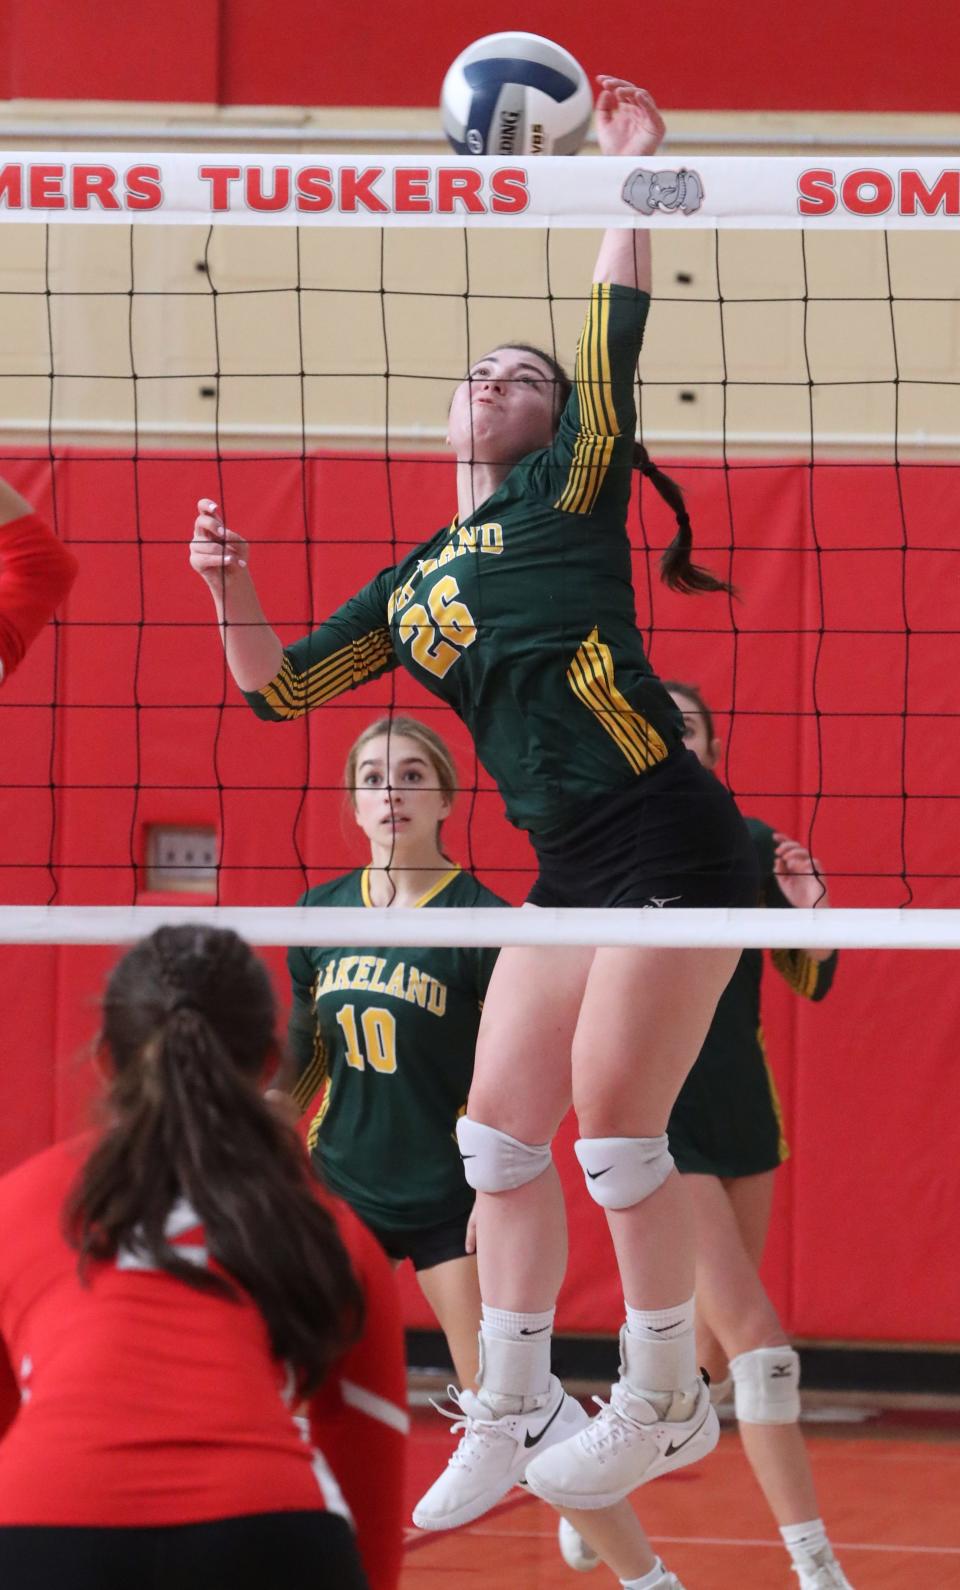 Lakeland's Kayla Jennings spikes the ball during a match at Somers Sept. 28, 2022. Lakeland won 3 sets to 0.